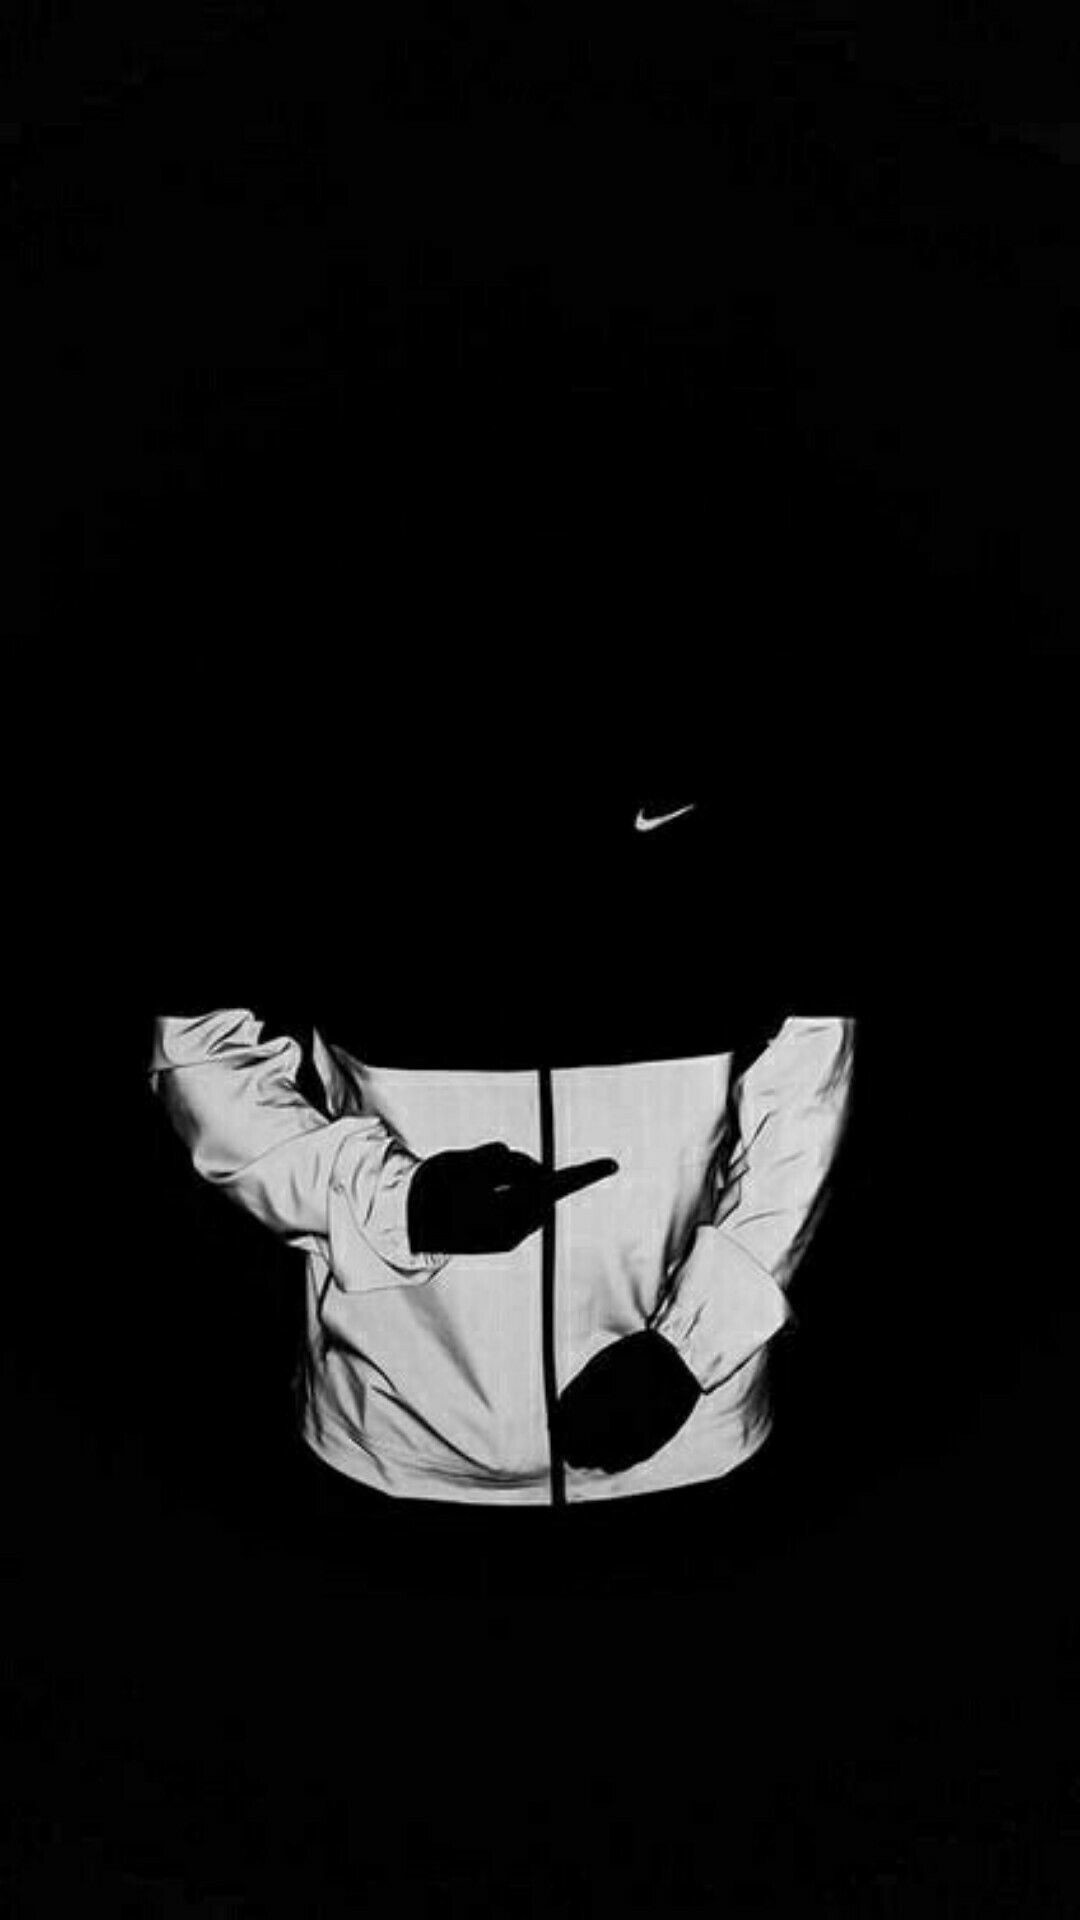 78 Dope Nike Wallpapers on WallpaperPlay